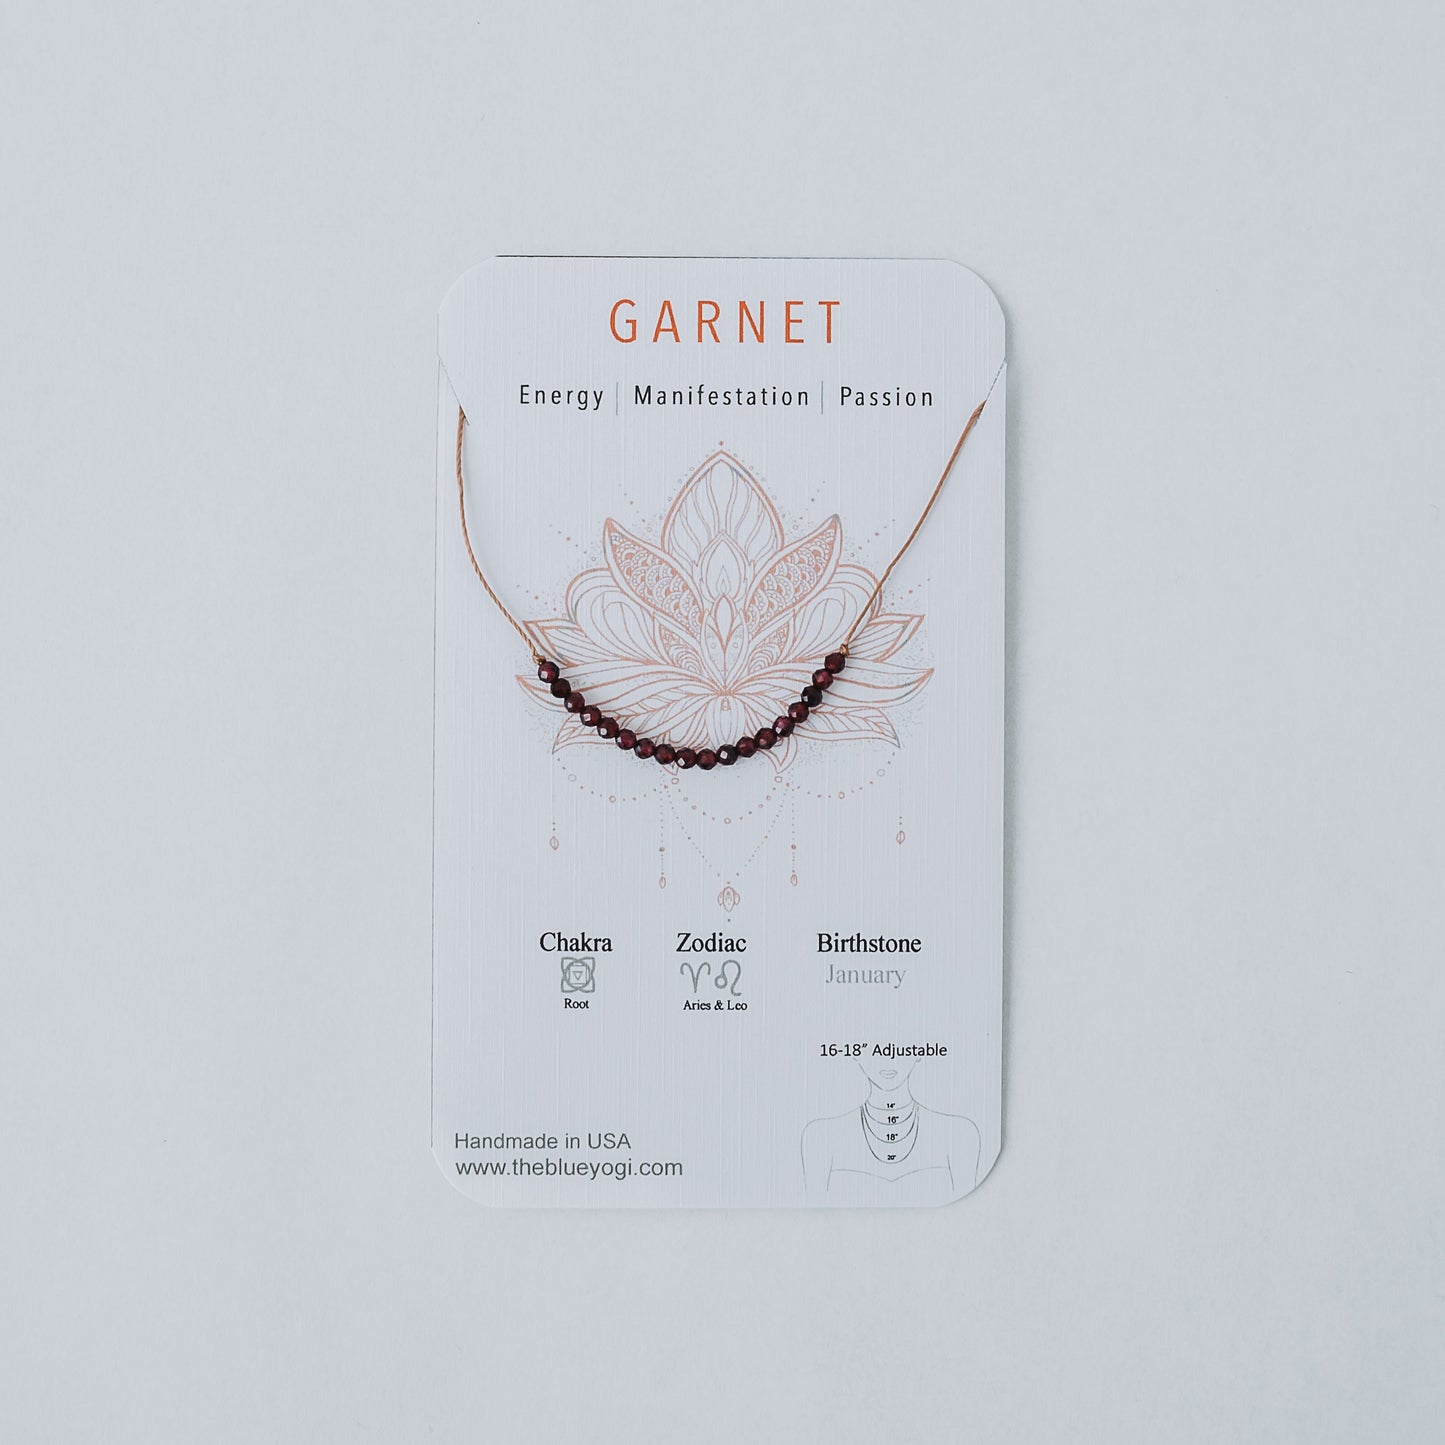 Dainty 4mm Faceted Garnet and Sterling silver Necklace - Minimal, casual and light weight - 16”- 18” adjustable - Theblueyogi